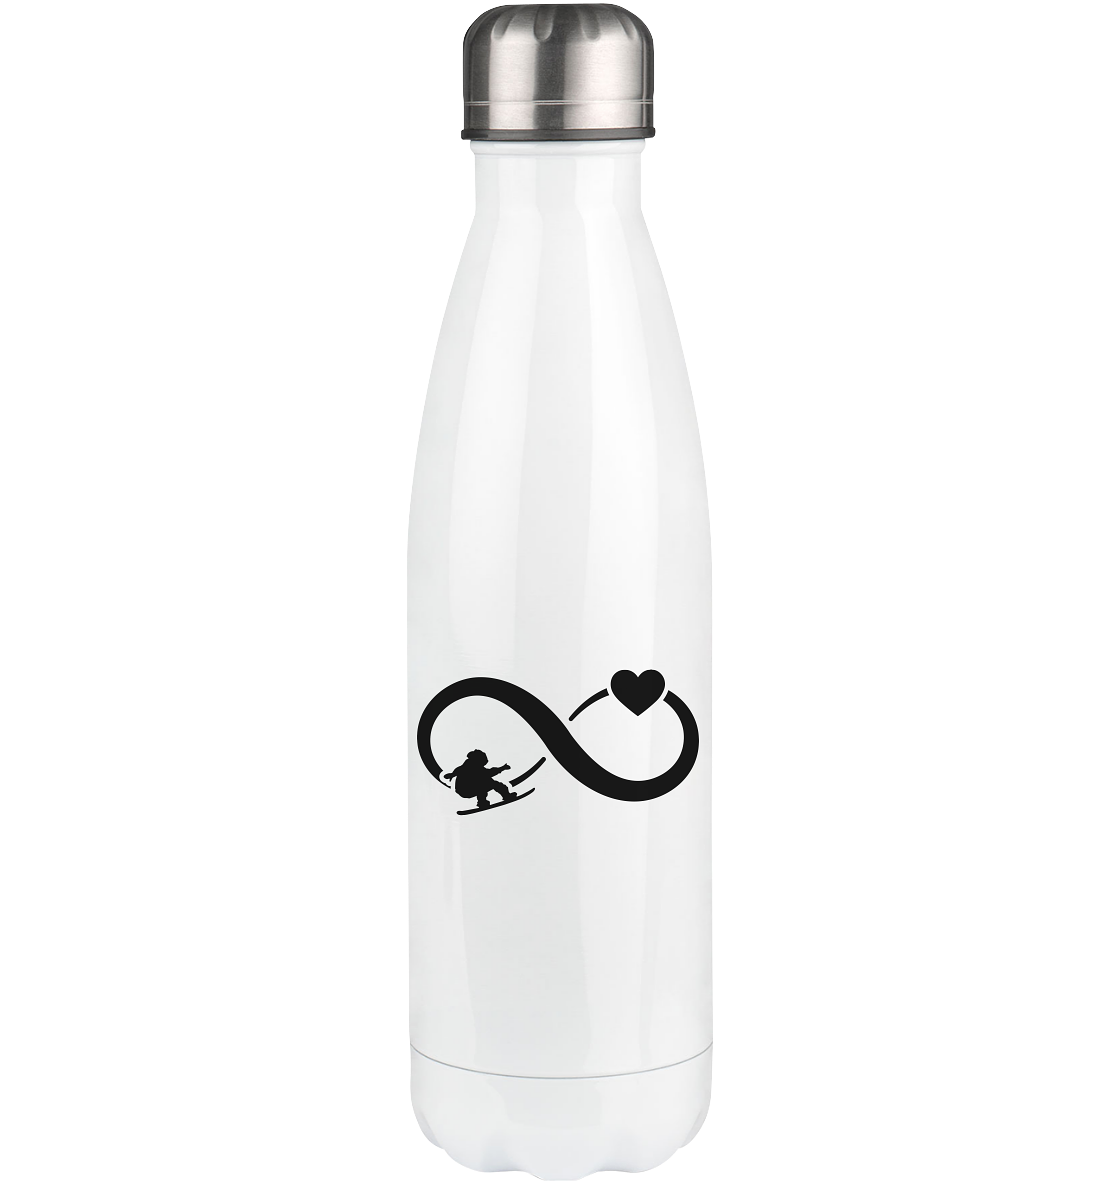 Infinity Heart and Snowboarding - Edelstahl Thermosflasche snowboarden 500ml